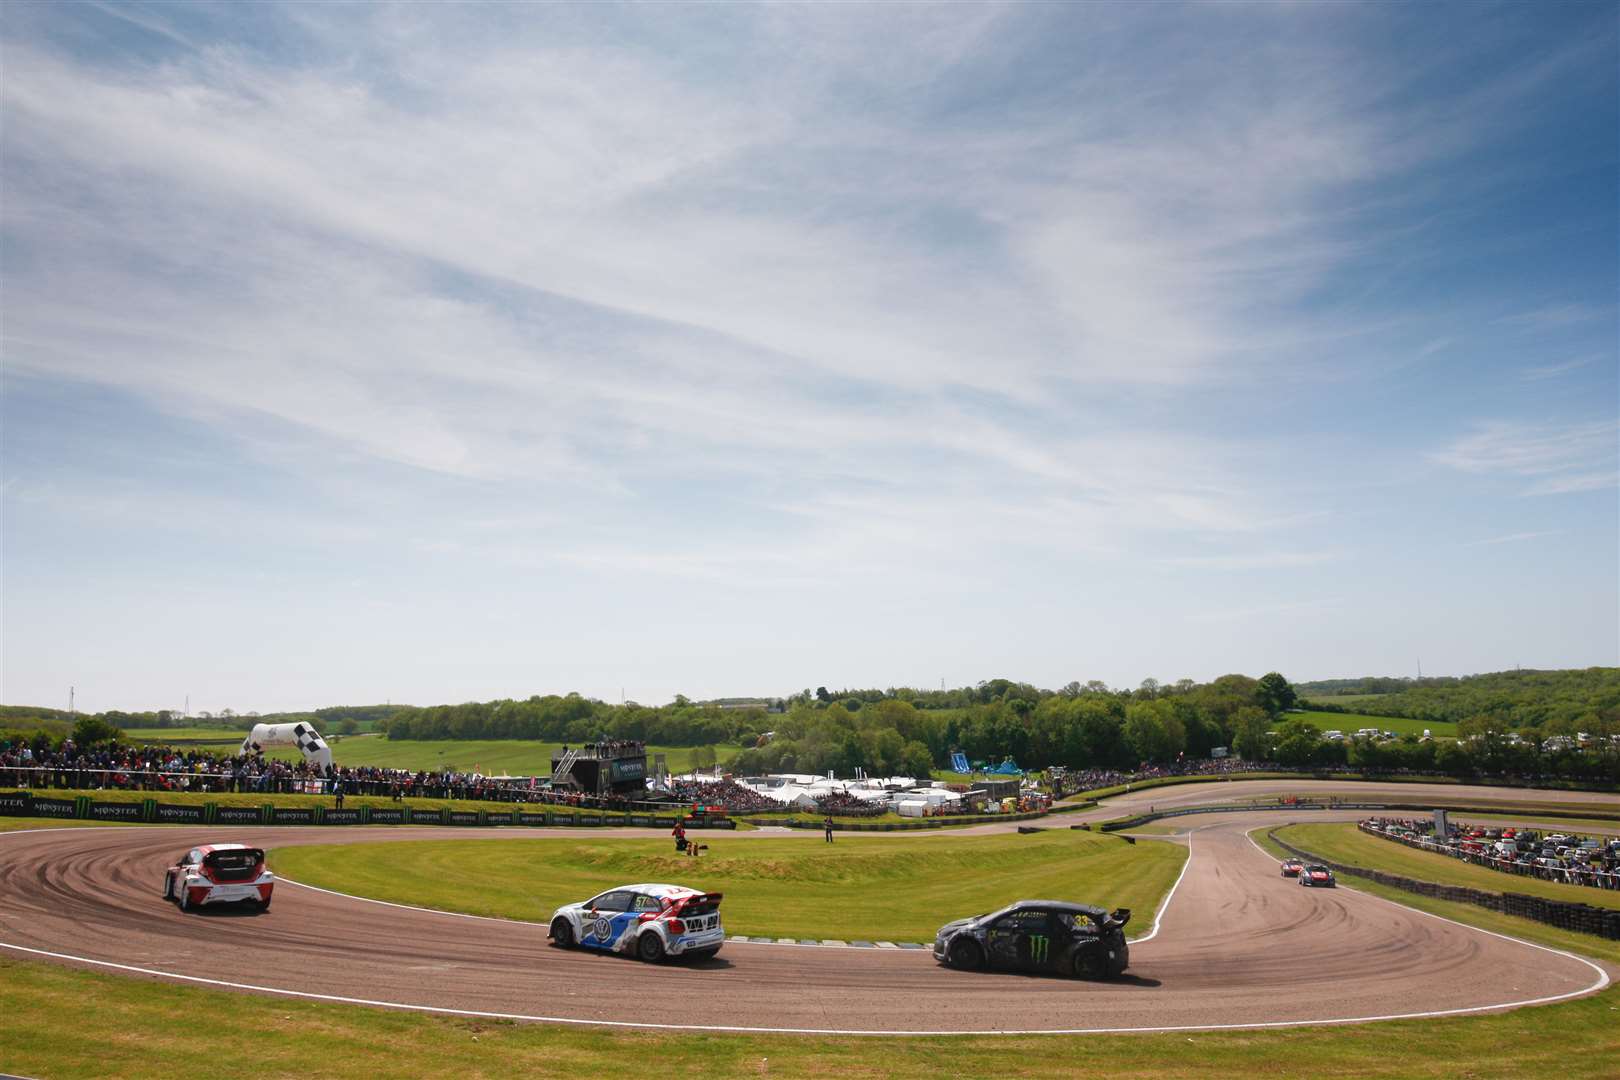 FIA World Rallycross Championship action from Lydden Hill